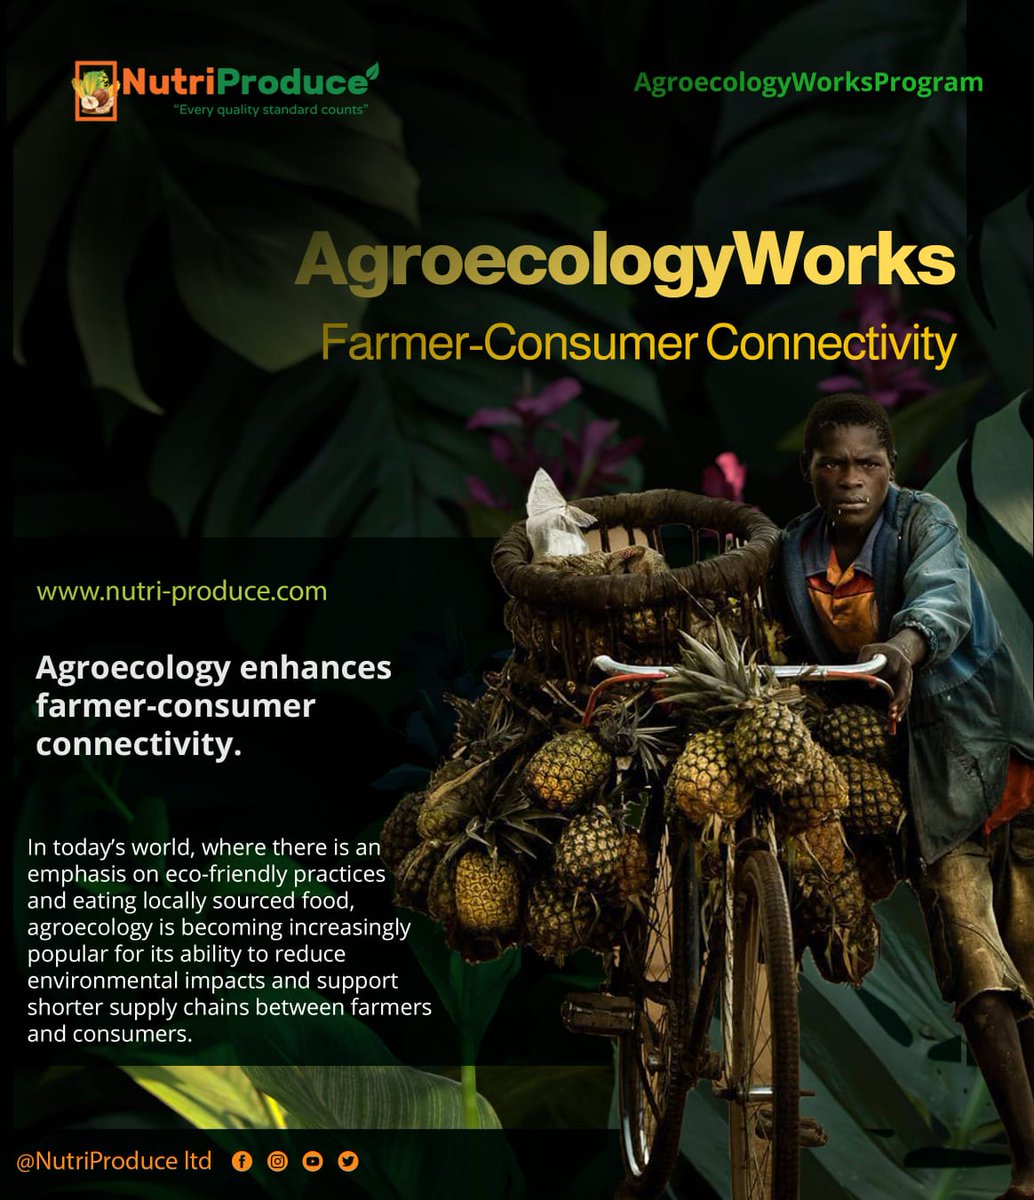 #AgroecologyWorks
🫛🥬🫒🍍🥦🌽🥕

#Agroecology and farmer-consumer connectivity are essential components of a #Sustainable and #resilient #FoodSystem. 

By fostering direct connections between farmers and consumers, #agroecology encourages #transparency, #education, and #trust in…